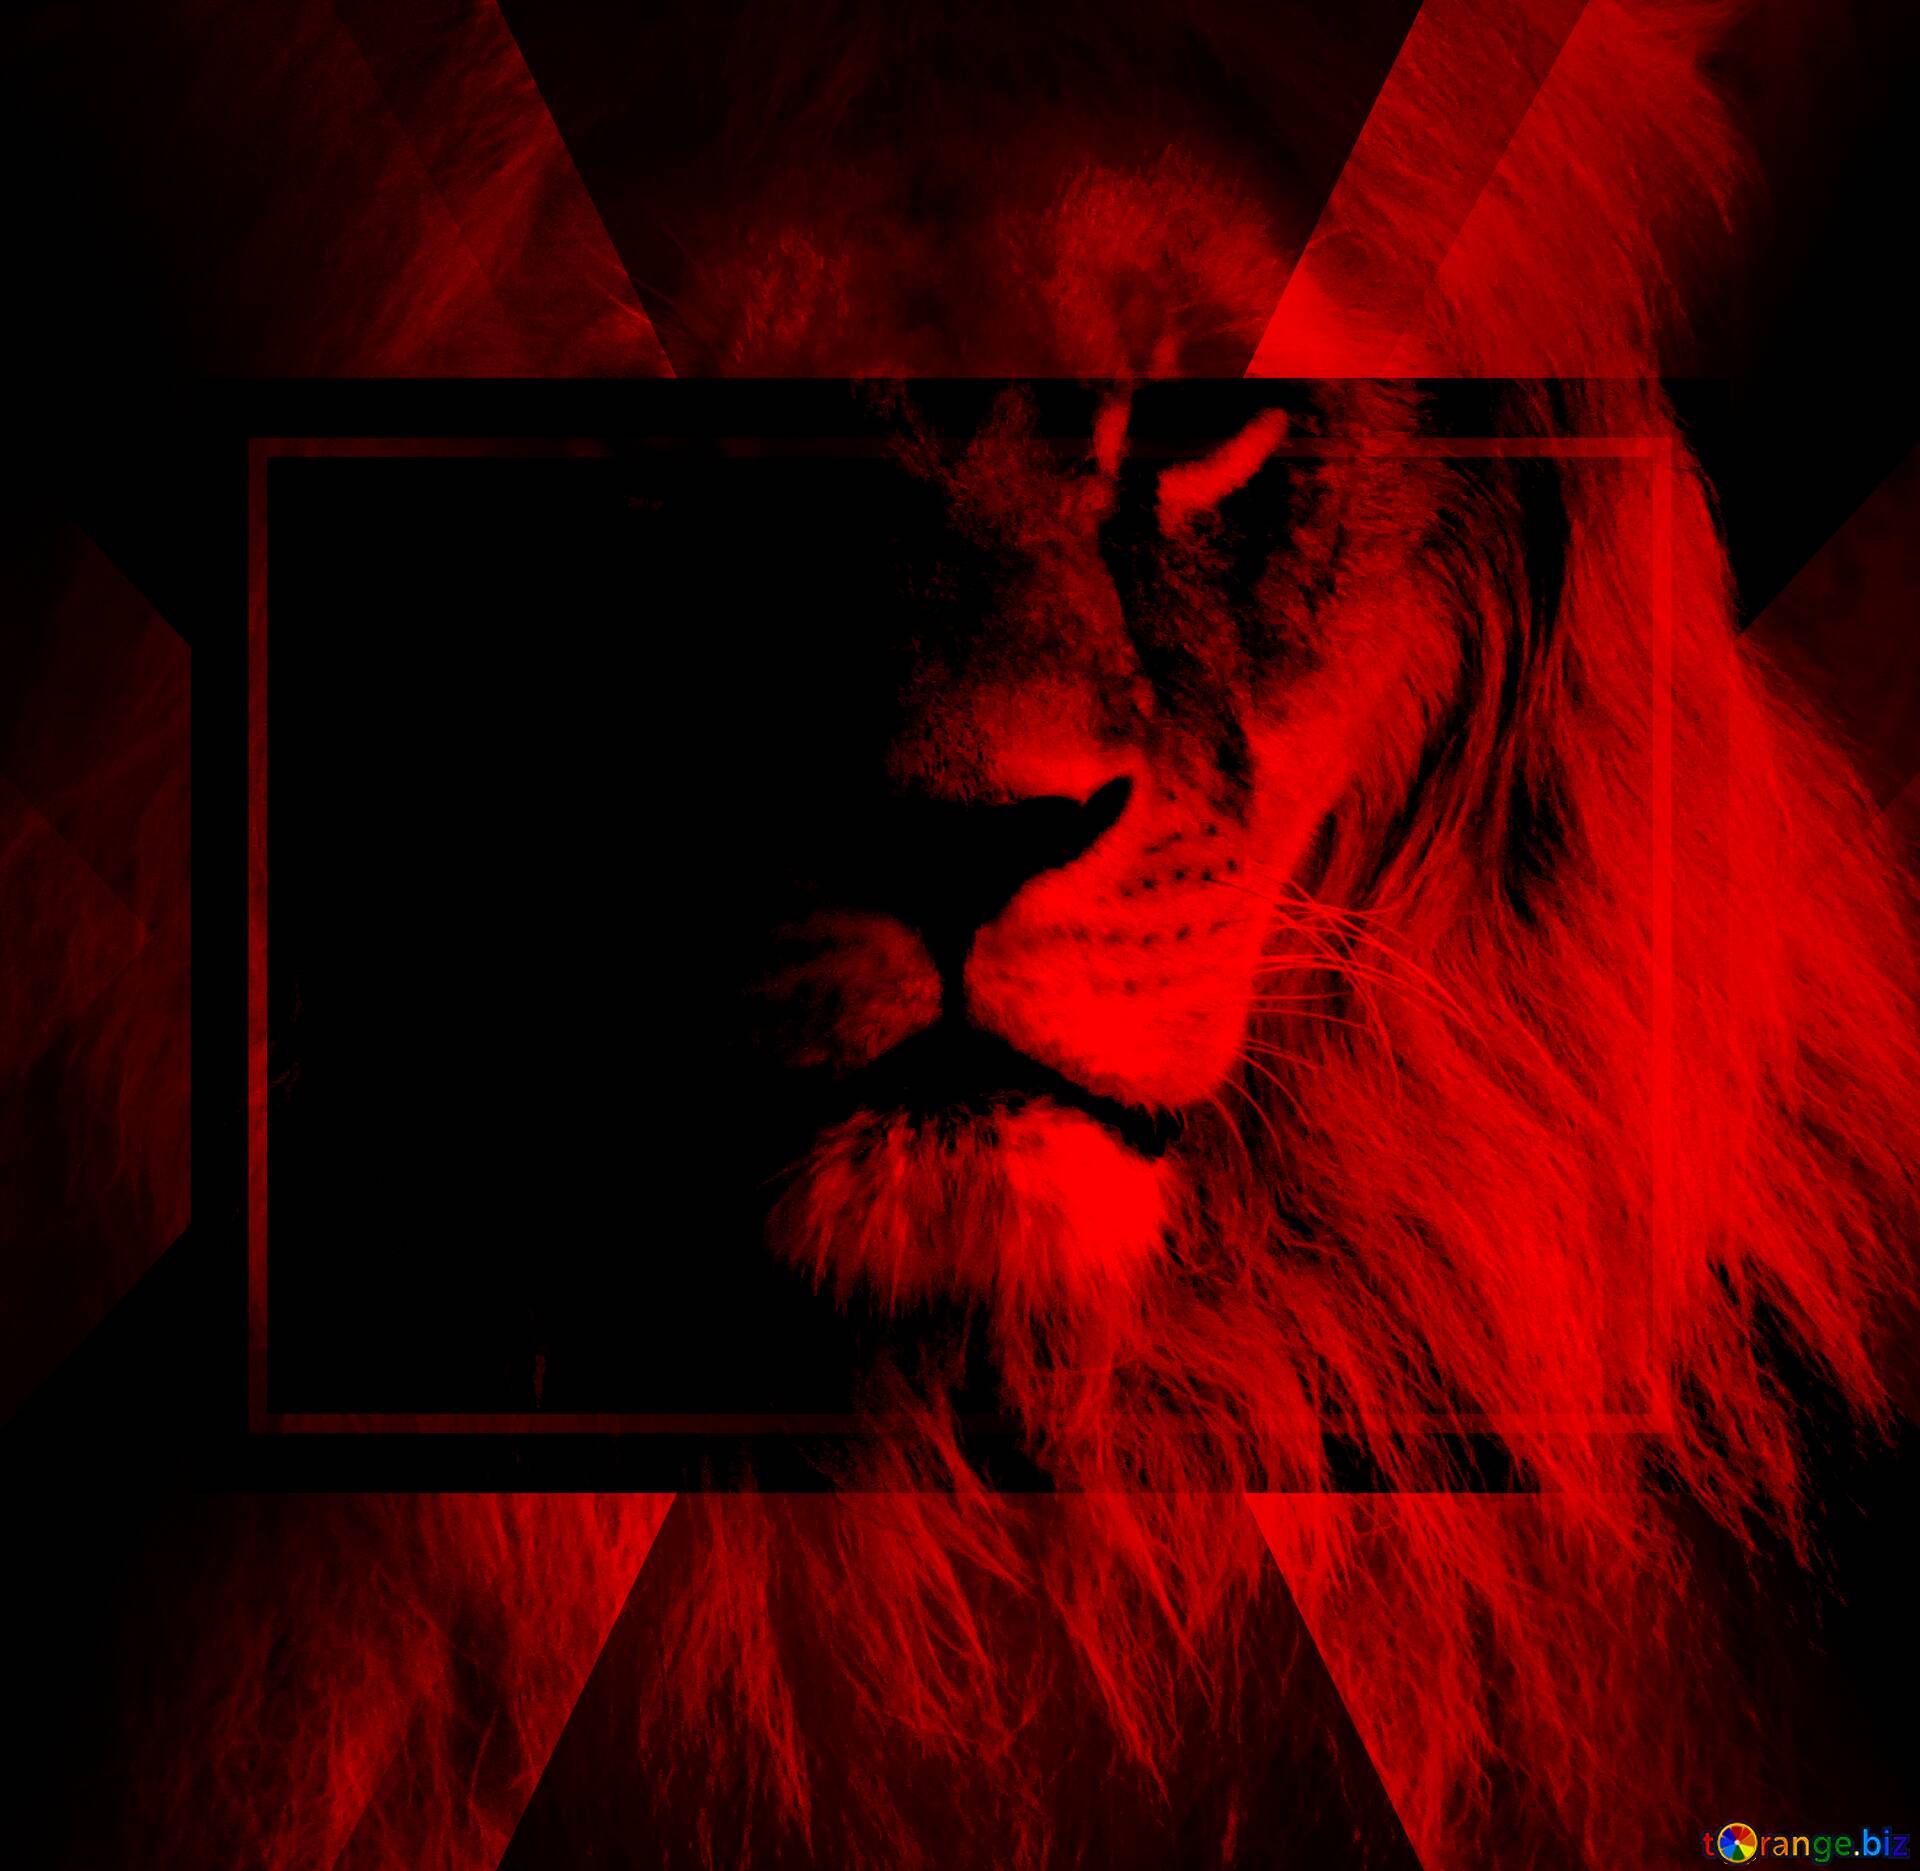 Download Free Picture Red Lion Portrait Powerpoint Website Infographic Banner Layout Design Responsive Brochure Business On CC BY License Free Image Stock TOrange.biz Fx №186481